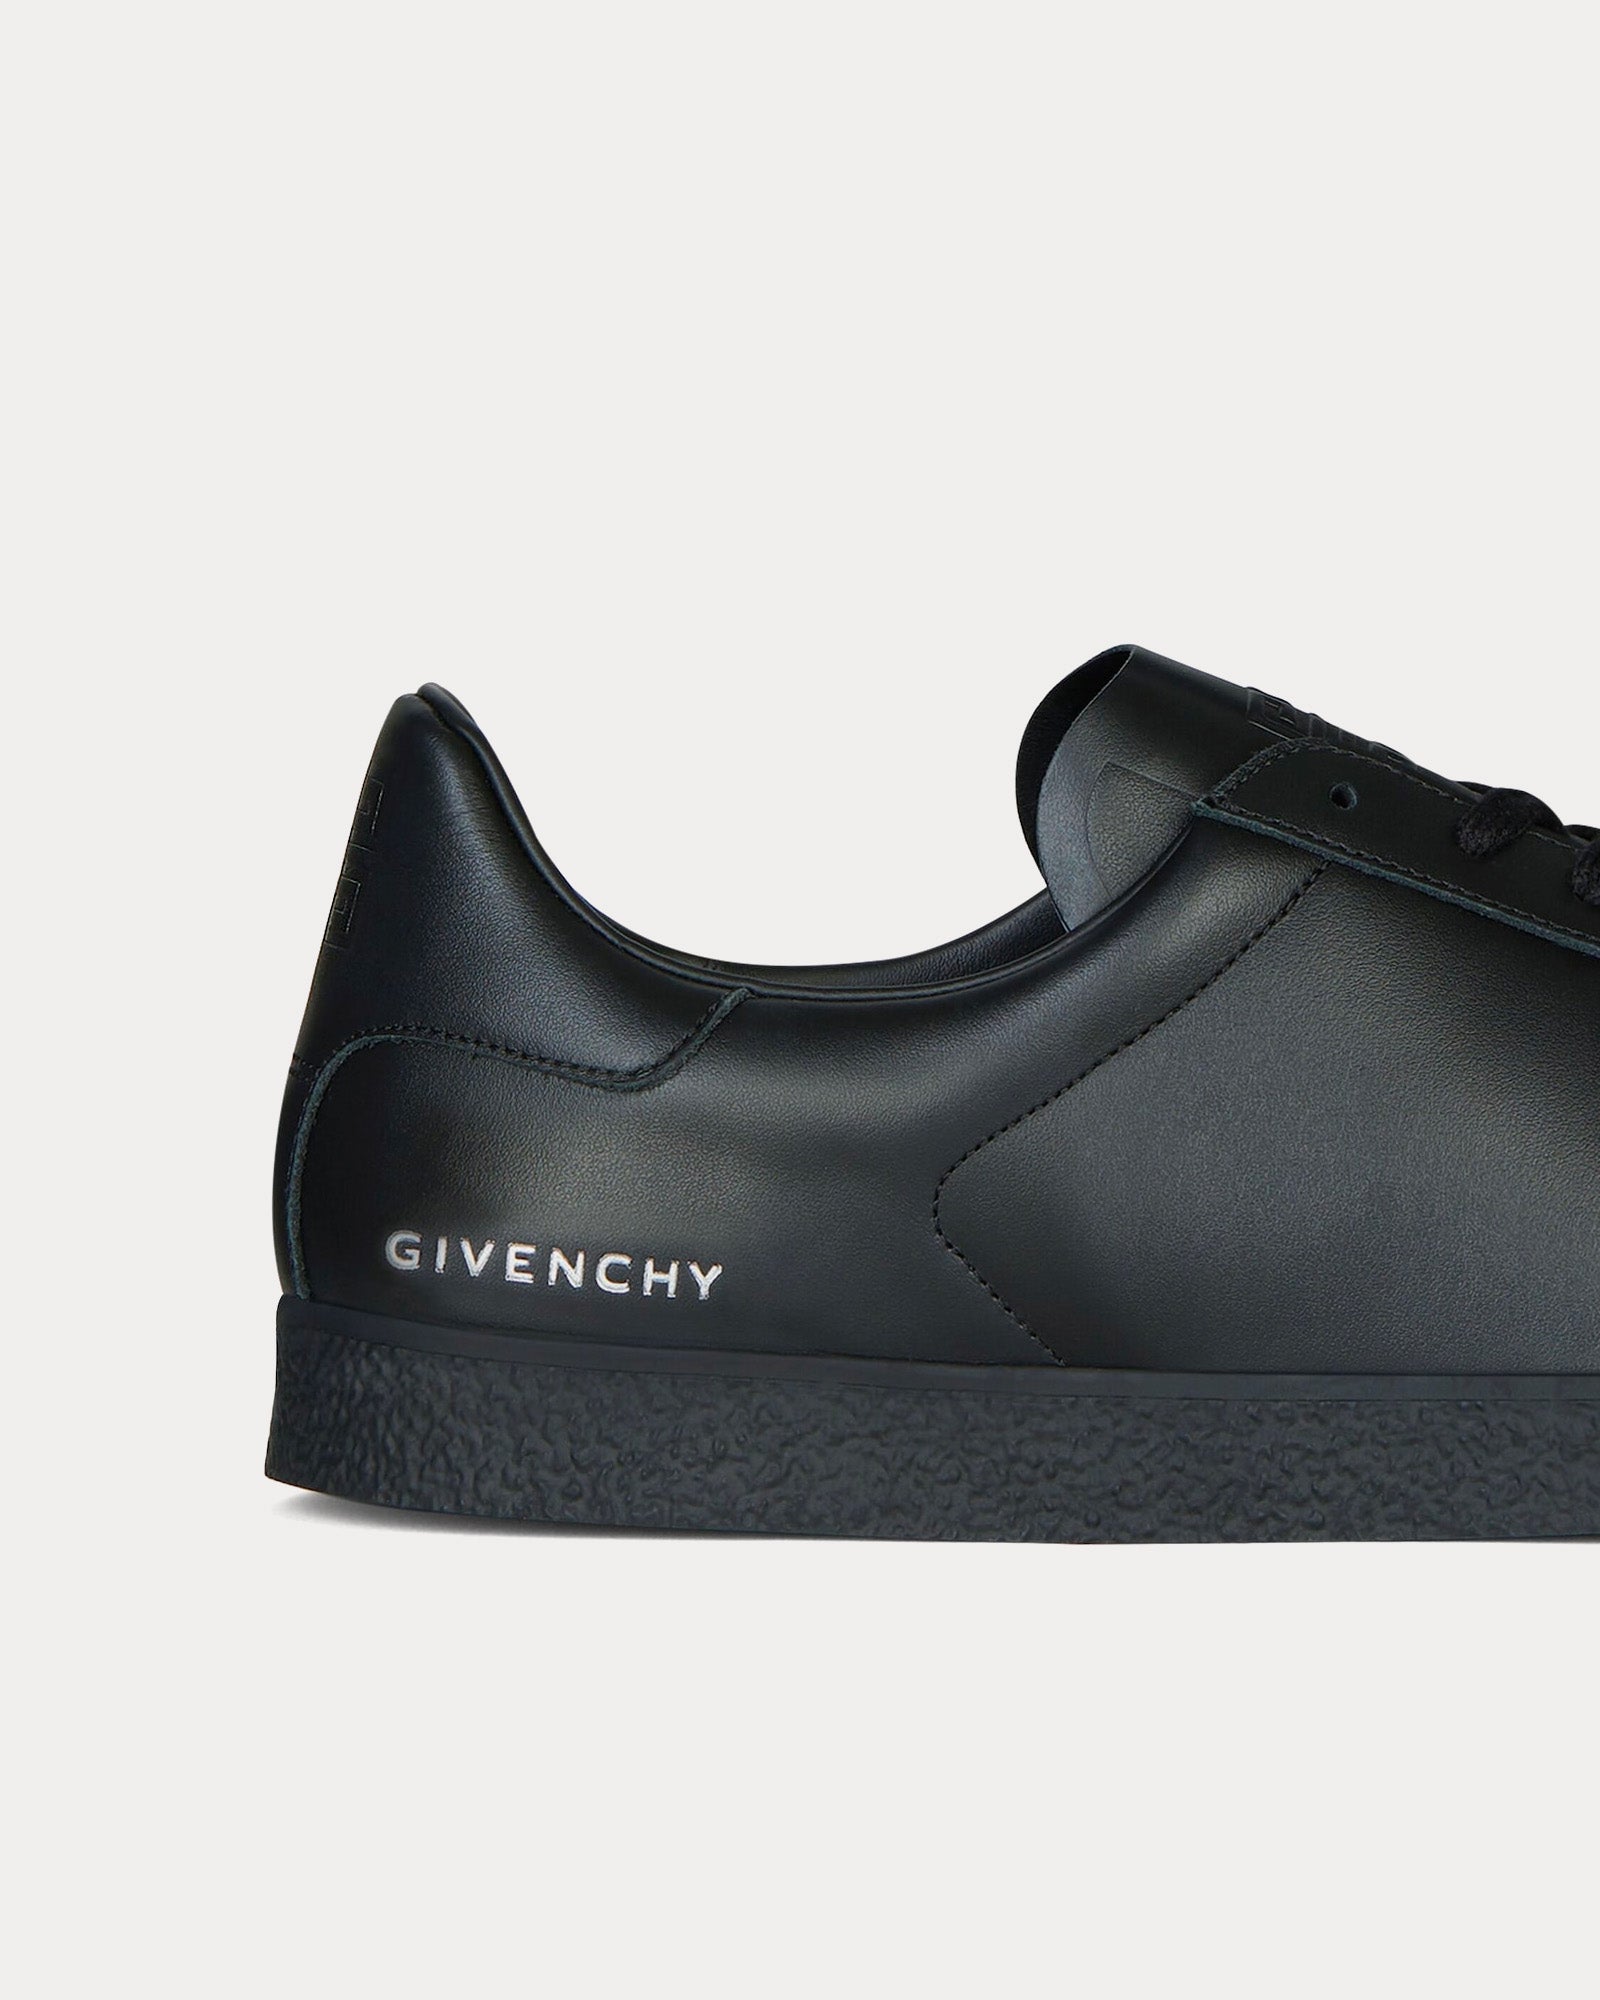 Givenchy - Town Leather Black Low Top Sneakers